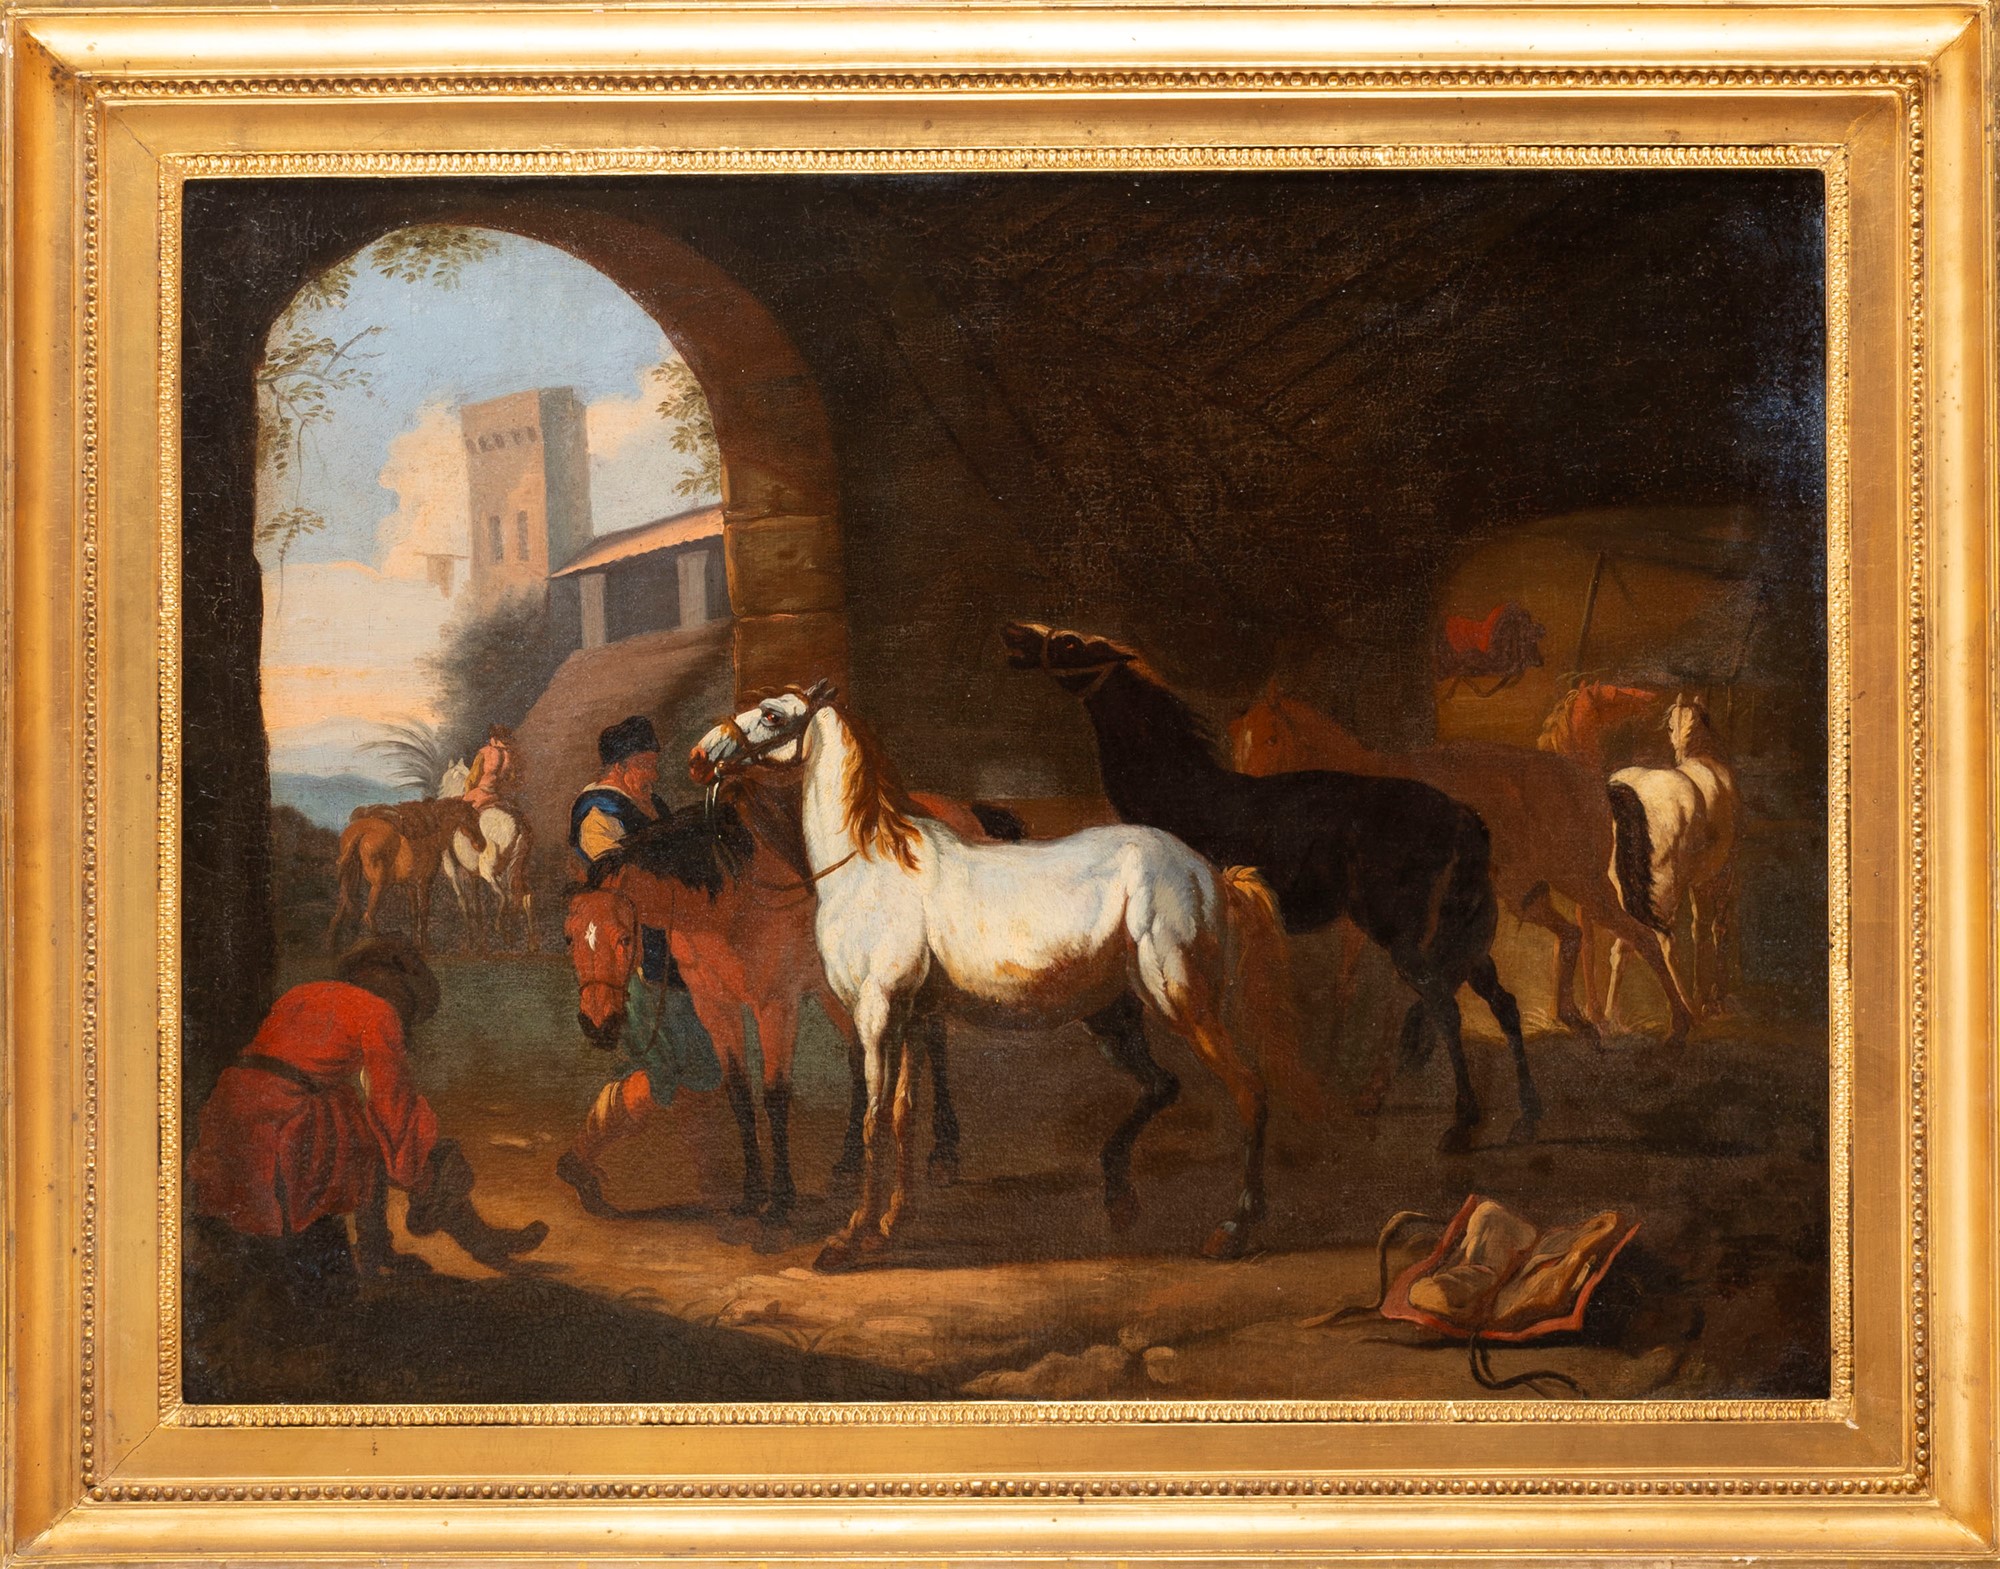 Flemish painter active in Italy, seventeenth century - Horses at rest with grooms - Image 2 of 3